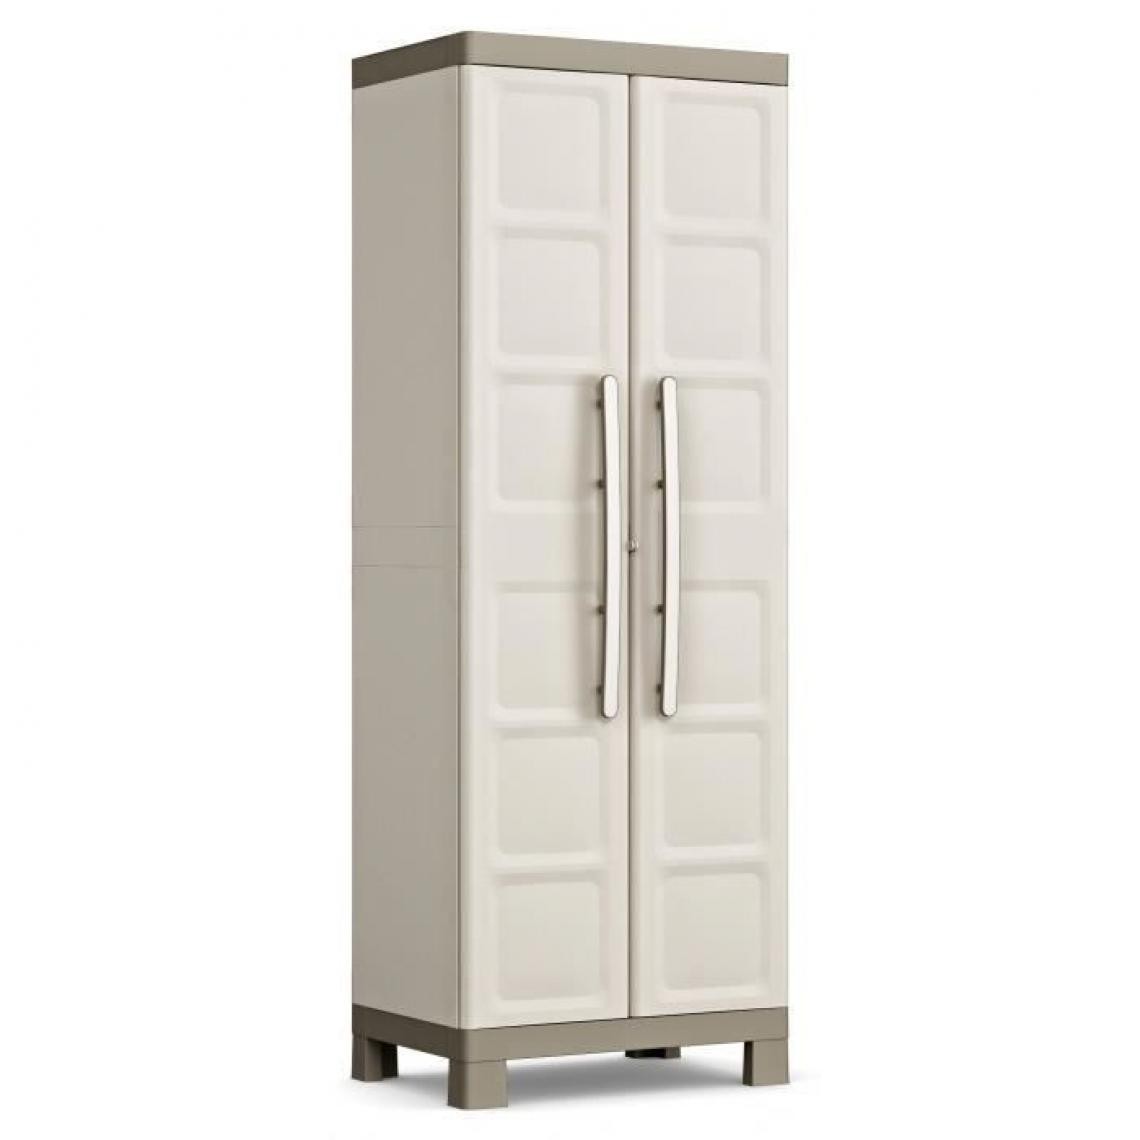 Keter - Armoire Utilitaire EXCELLENCE - Beige et Taupe - Armoires